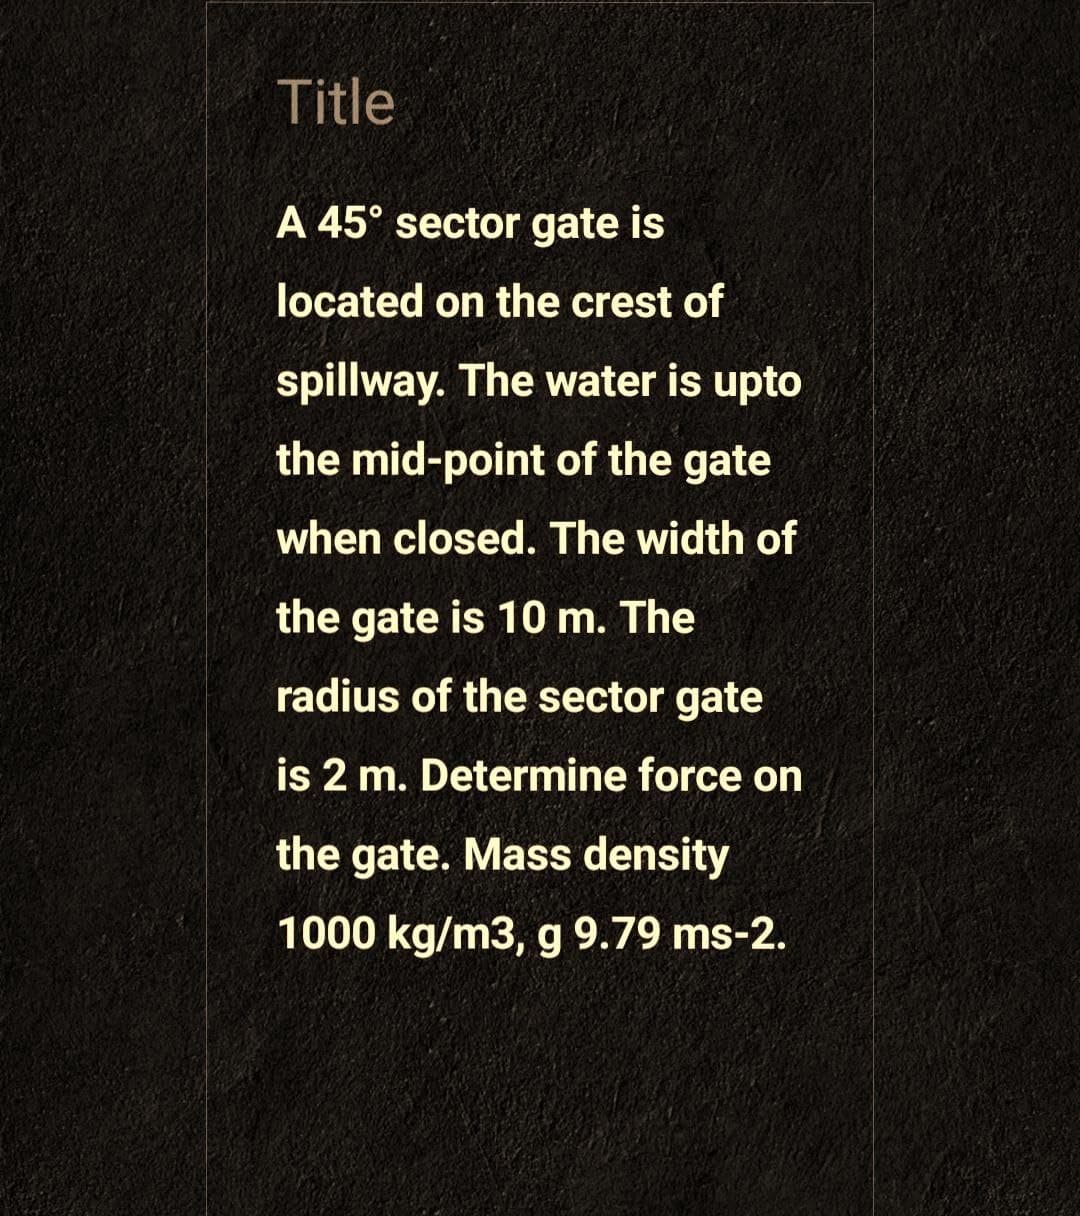 Title
A 45° sector gate is
located on the crest of
spillway. The water is upto
the mid-point of the gate
when closed. The width of
the gate is 10 m. The
radius of the sector gate
is 2 m. Determine force on
the gate. Mass density
1000 kg/m3, g 9.79 ms-2.
